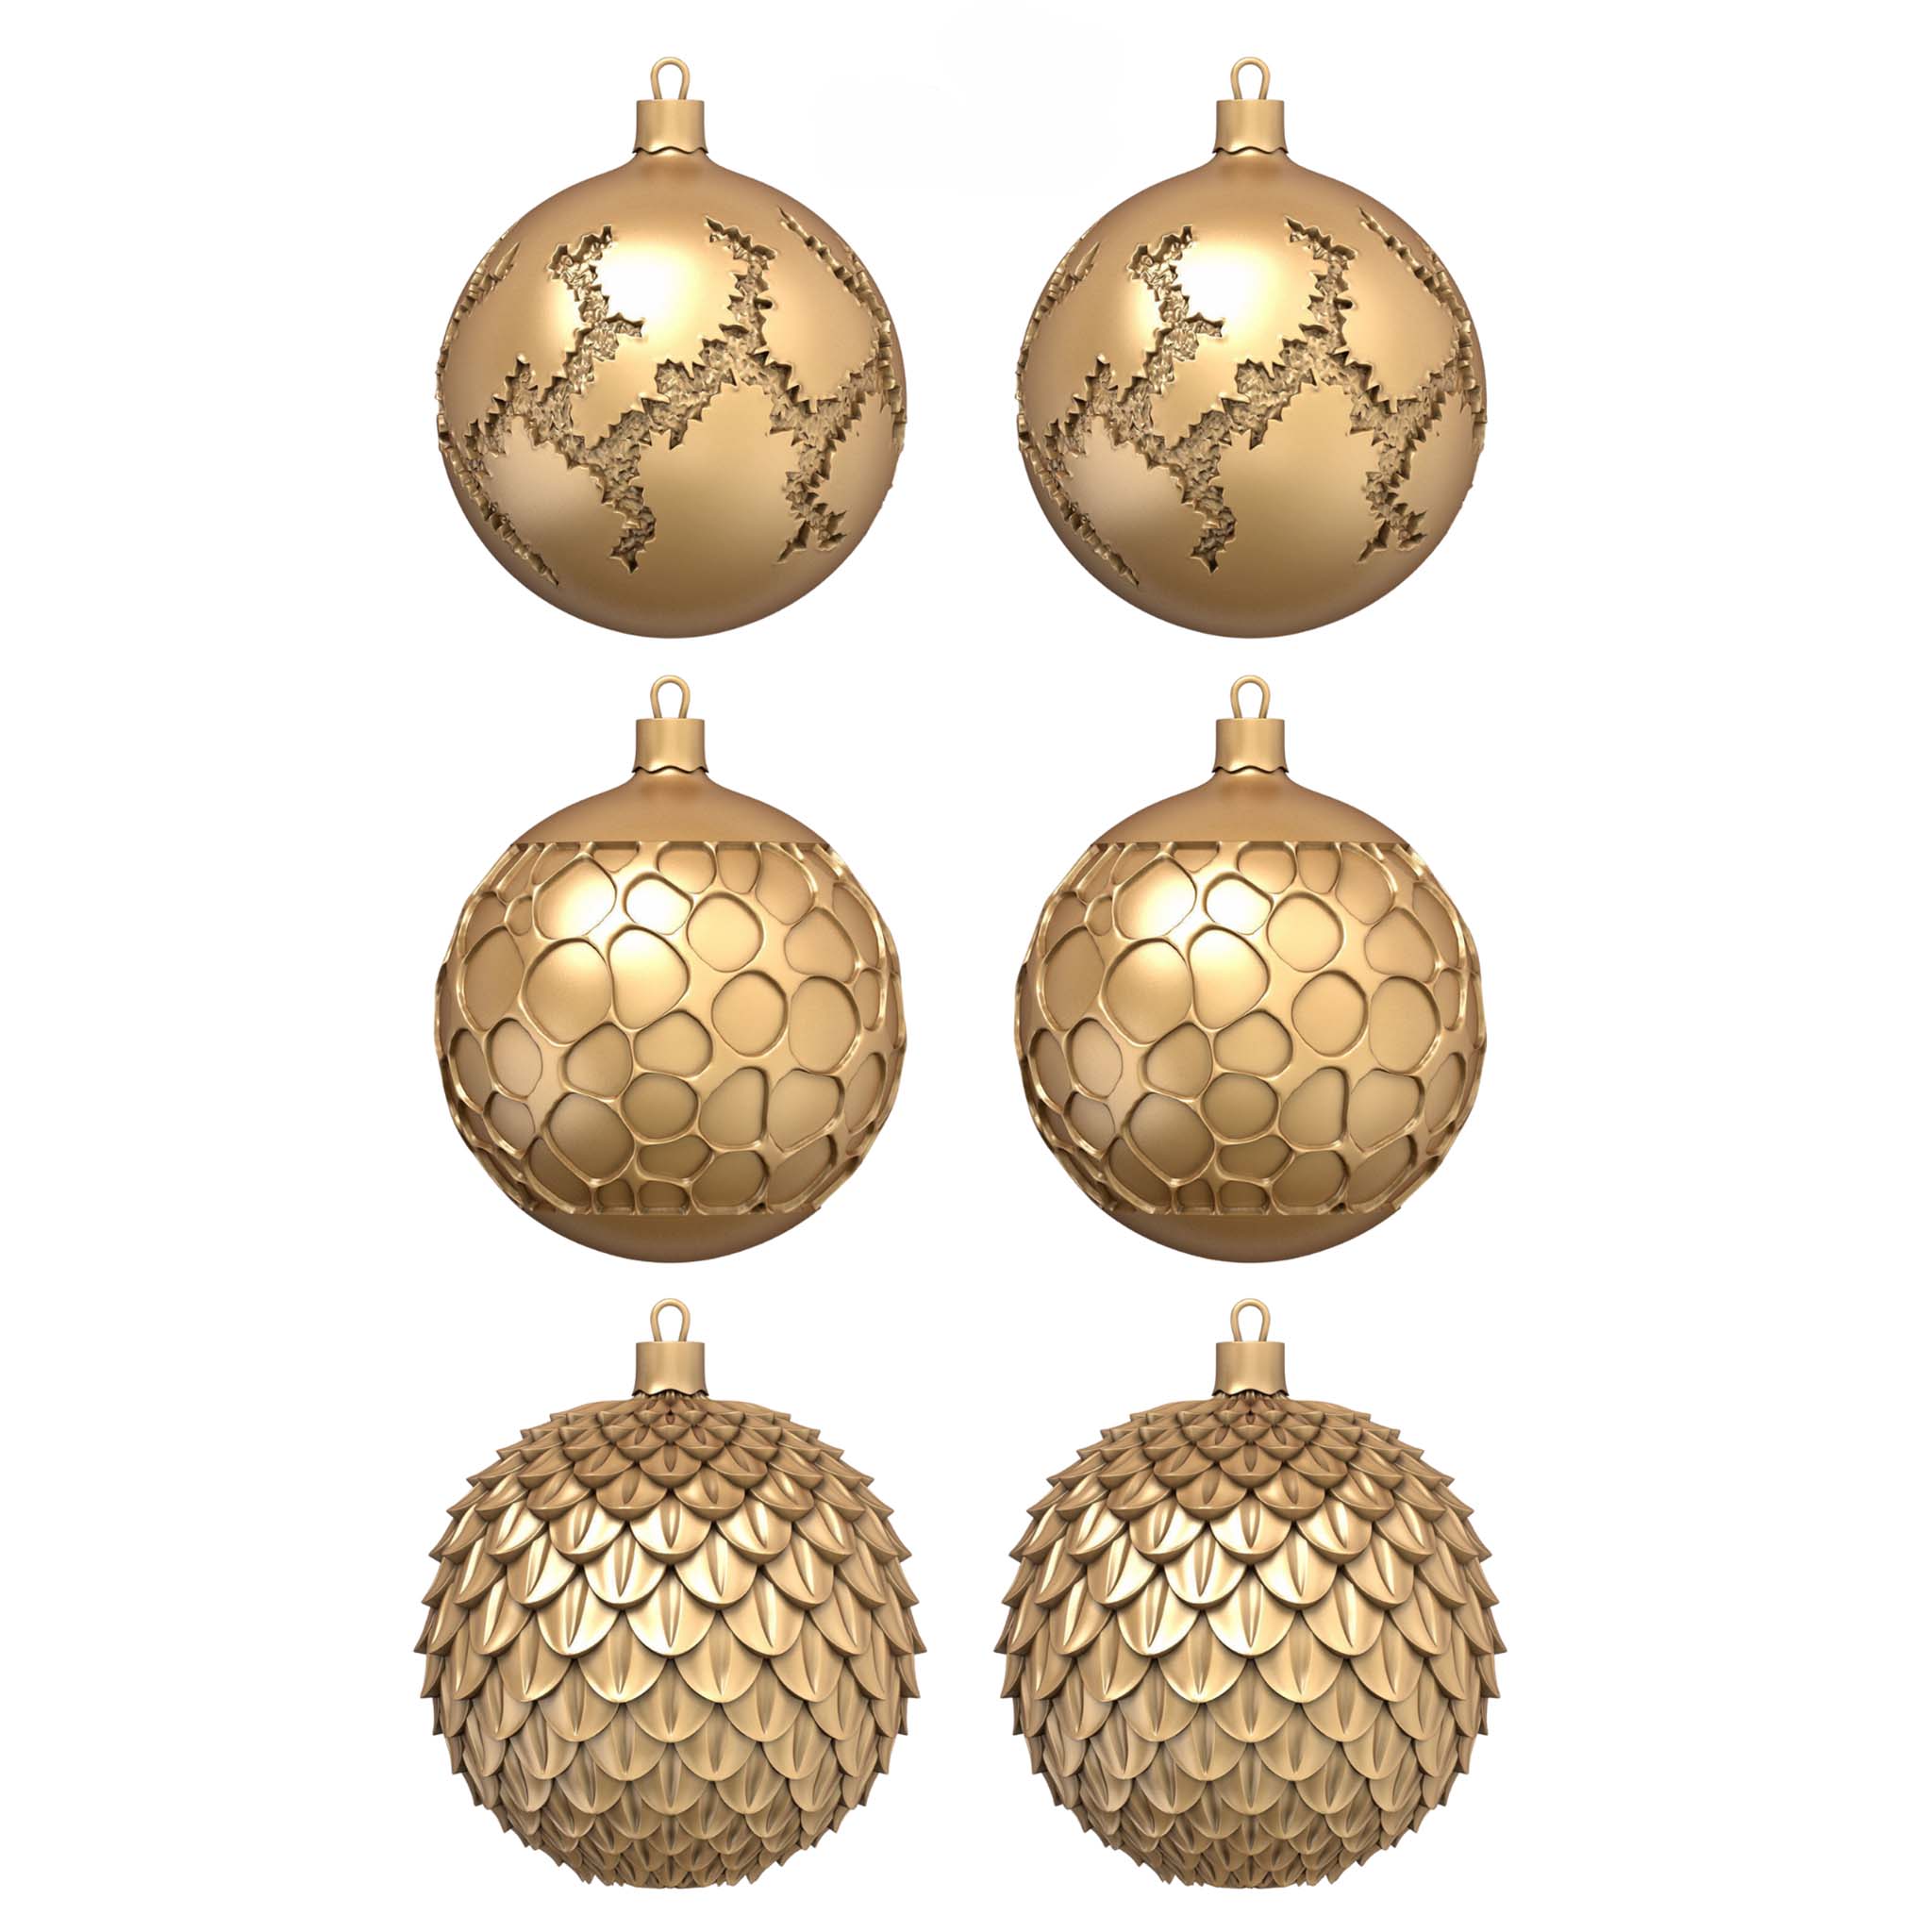 Gold colored silicone mould castings of 6 ornaments are against a white background. There are 2 each of 3 different designs.